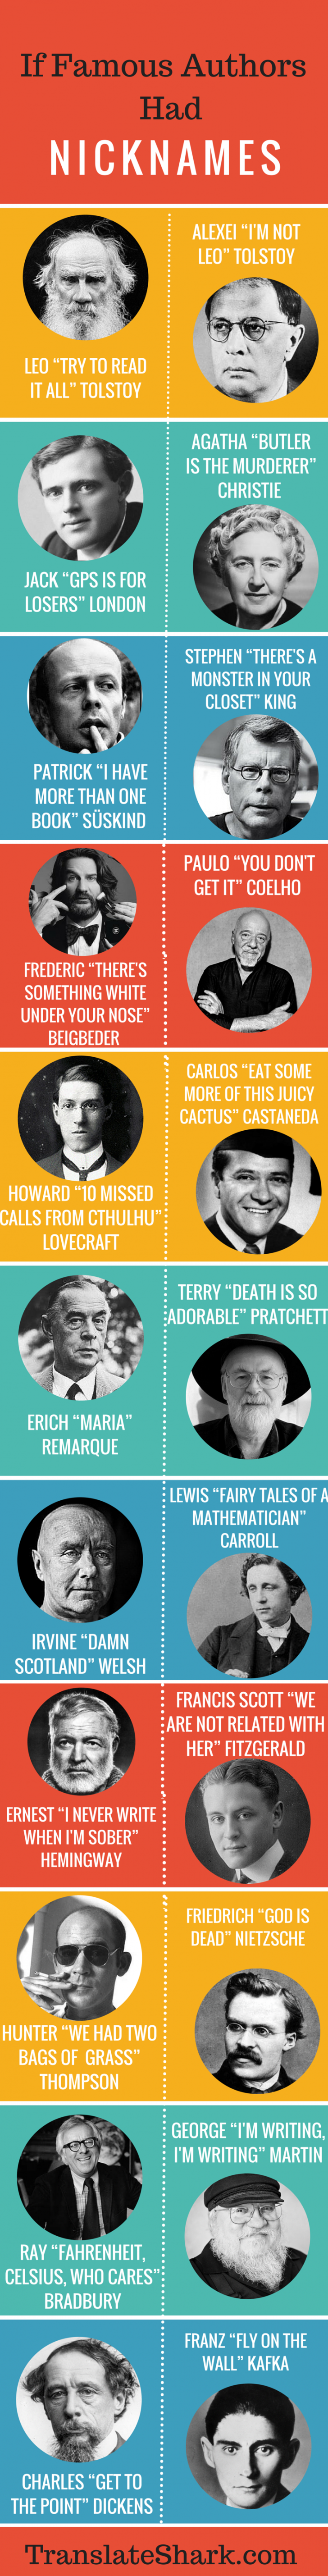 If+Famous+Authors+Had+Nicknames